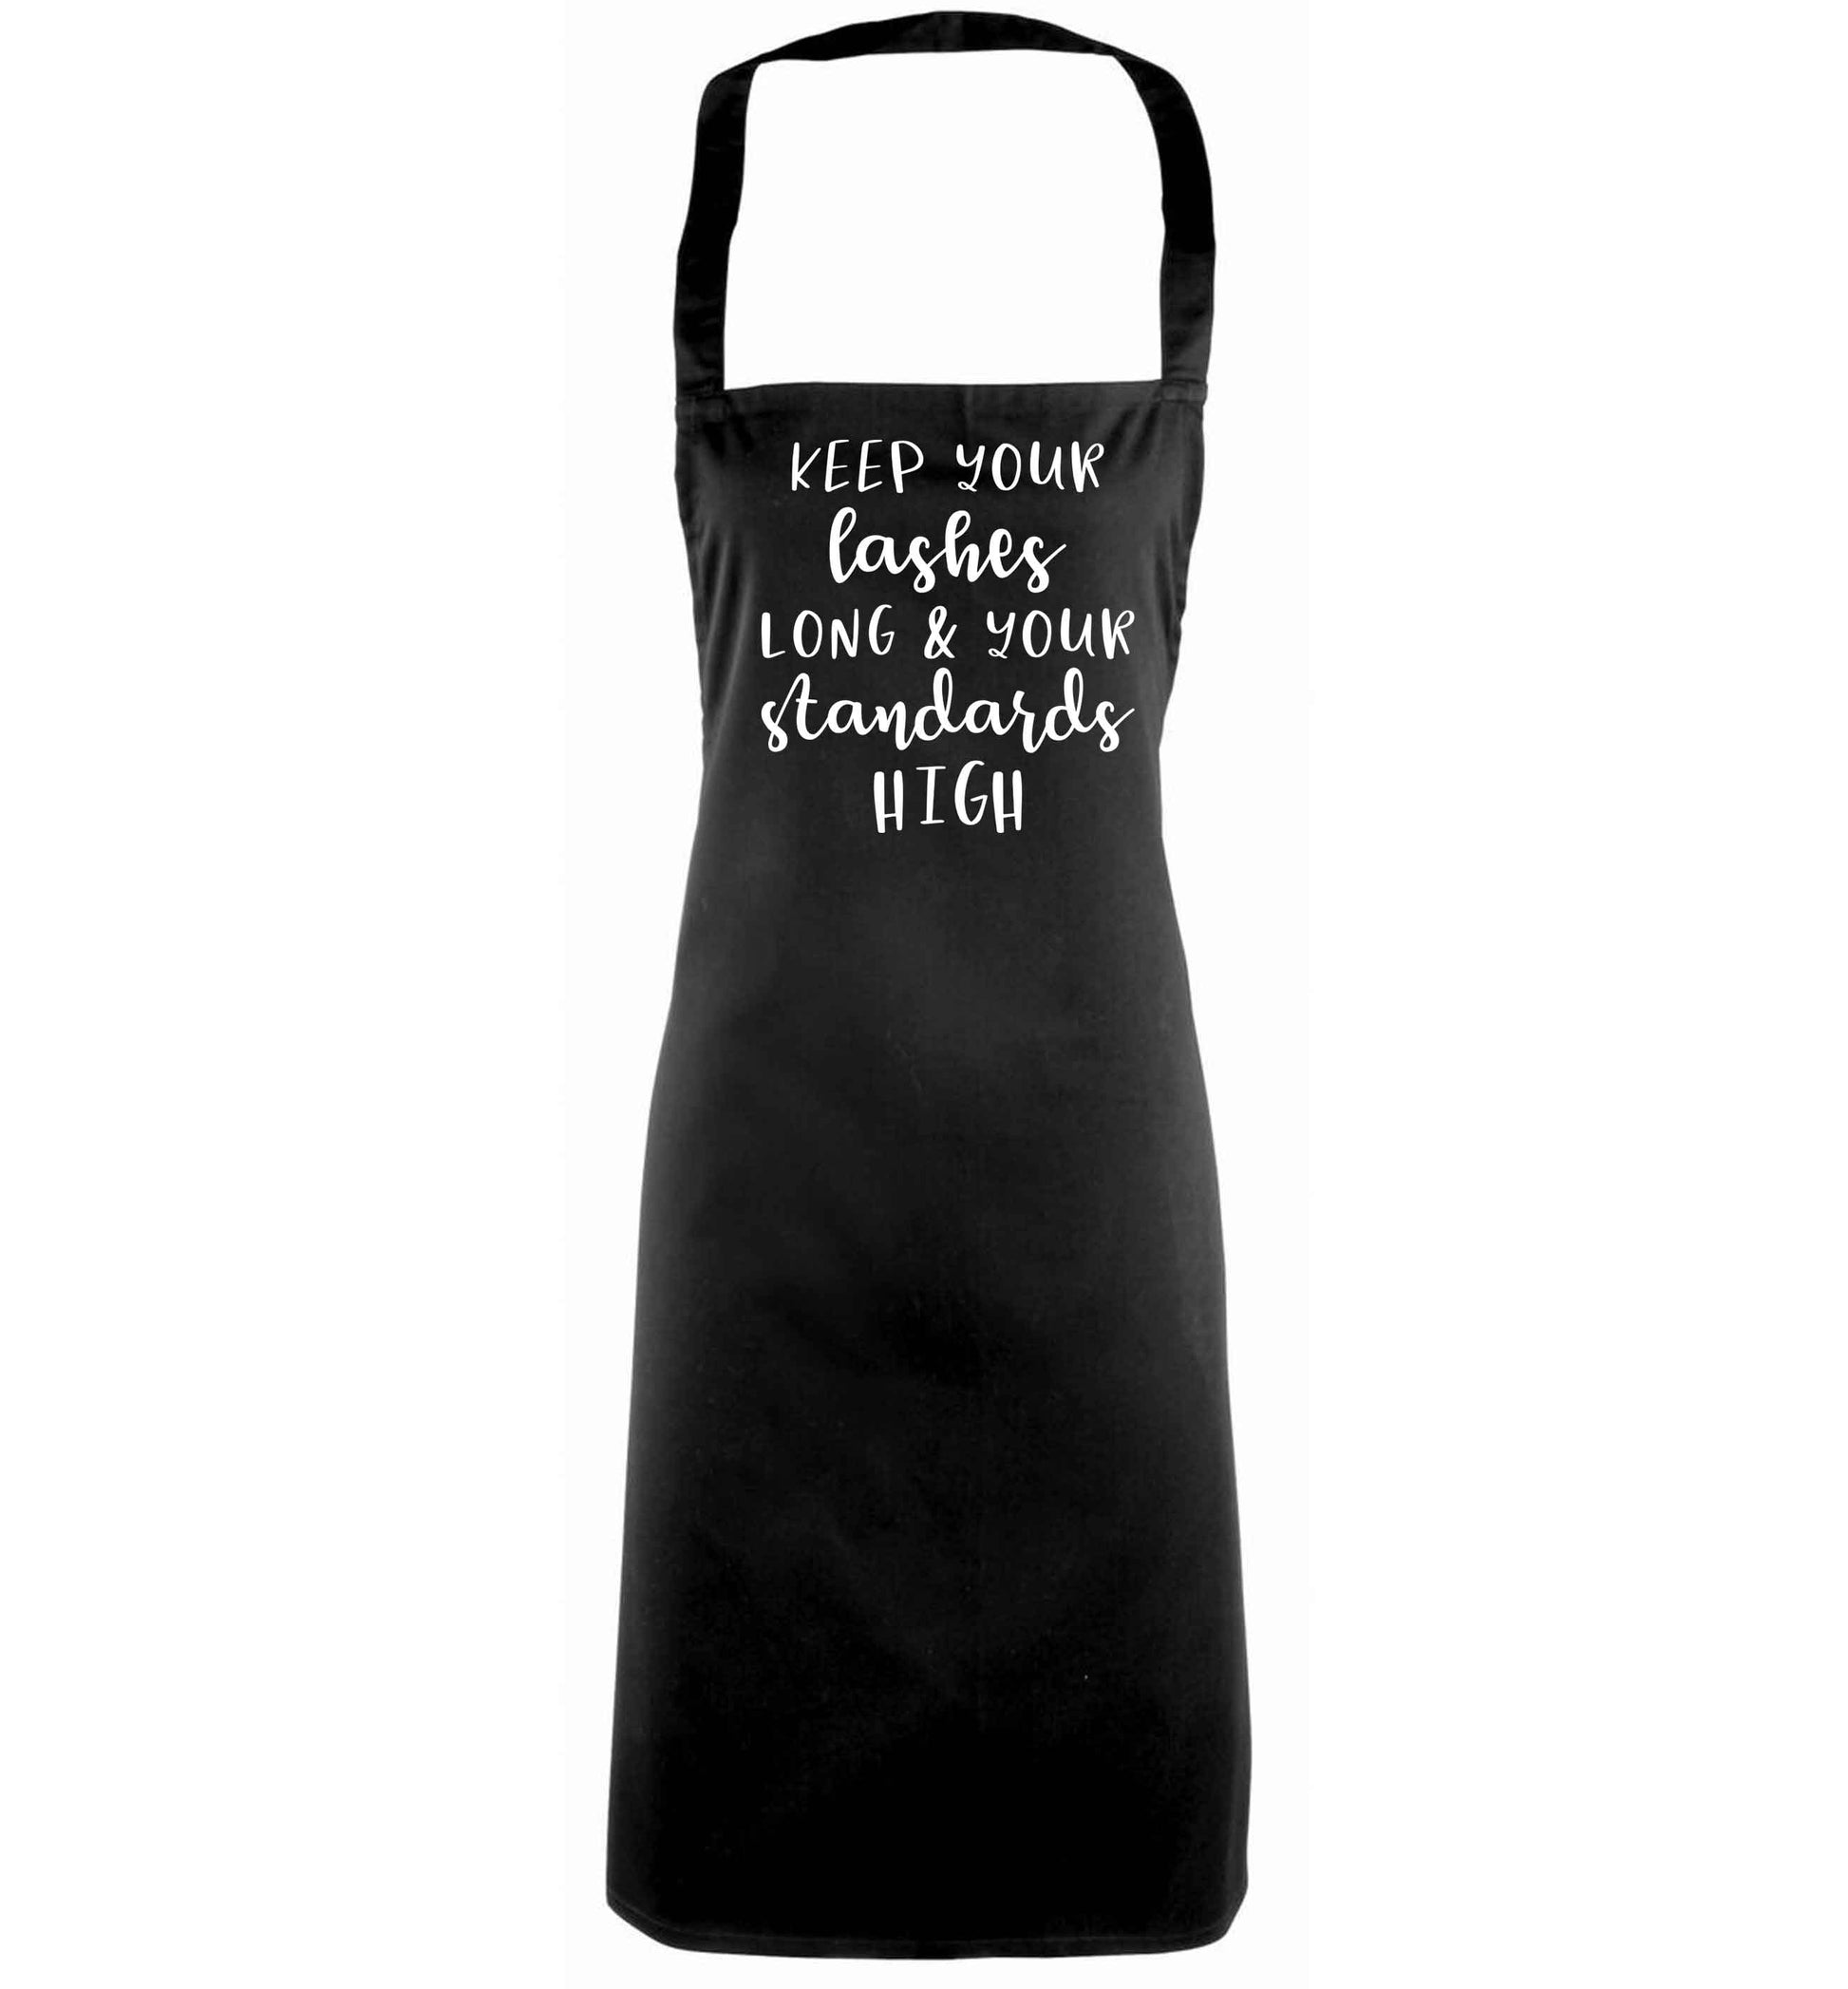 Keep your lashes long and your standards high black apron